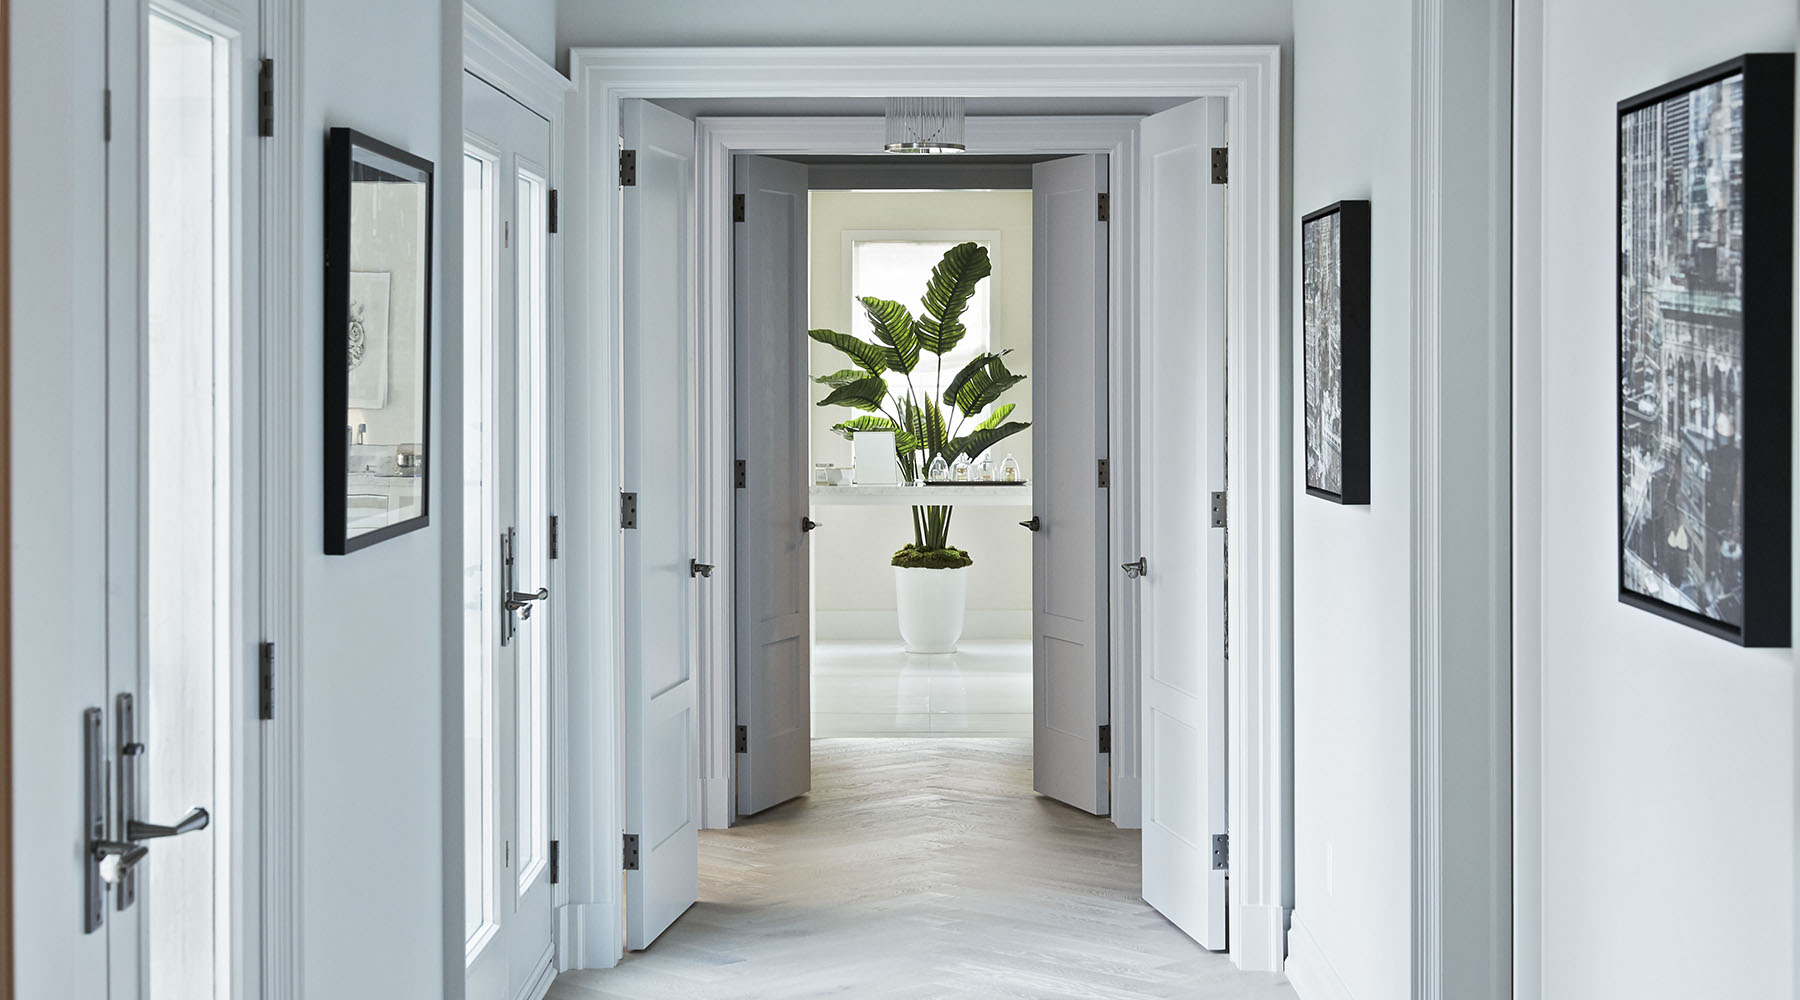 A hallway that has been painted with Benjamin Moore's Stonington Gray HC-170 paint color available at Clement's Paint in Austin, TX.